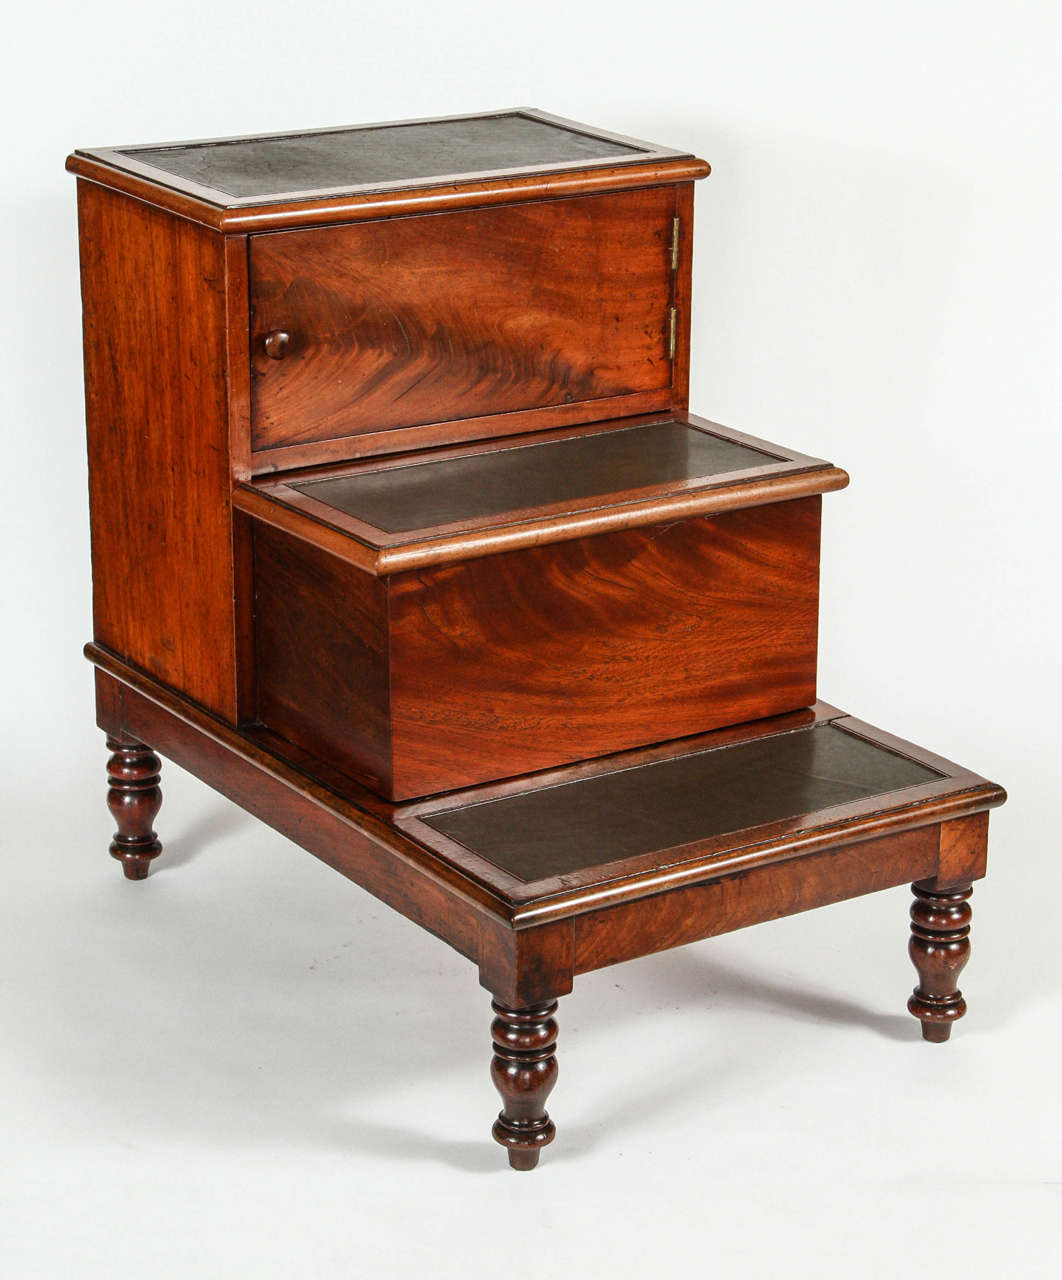 A Georgian Mahogany Bed Step with turned legs and a concealed drawer/shelf on the top step and the second step slides out for a chamber pot (not included), 19th c. with new leather treads.